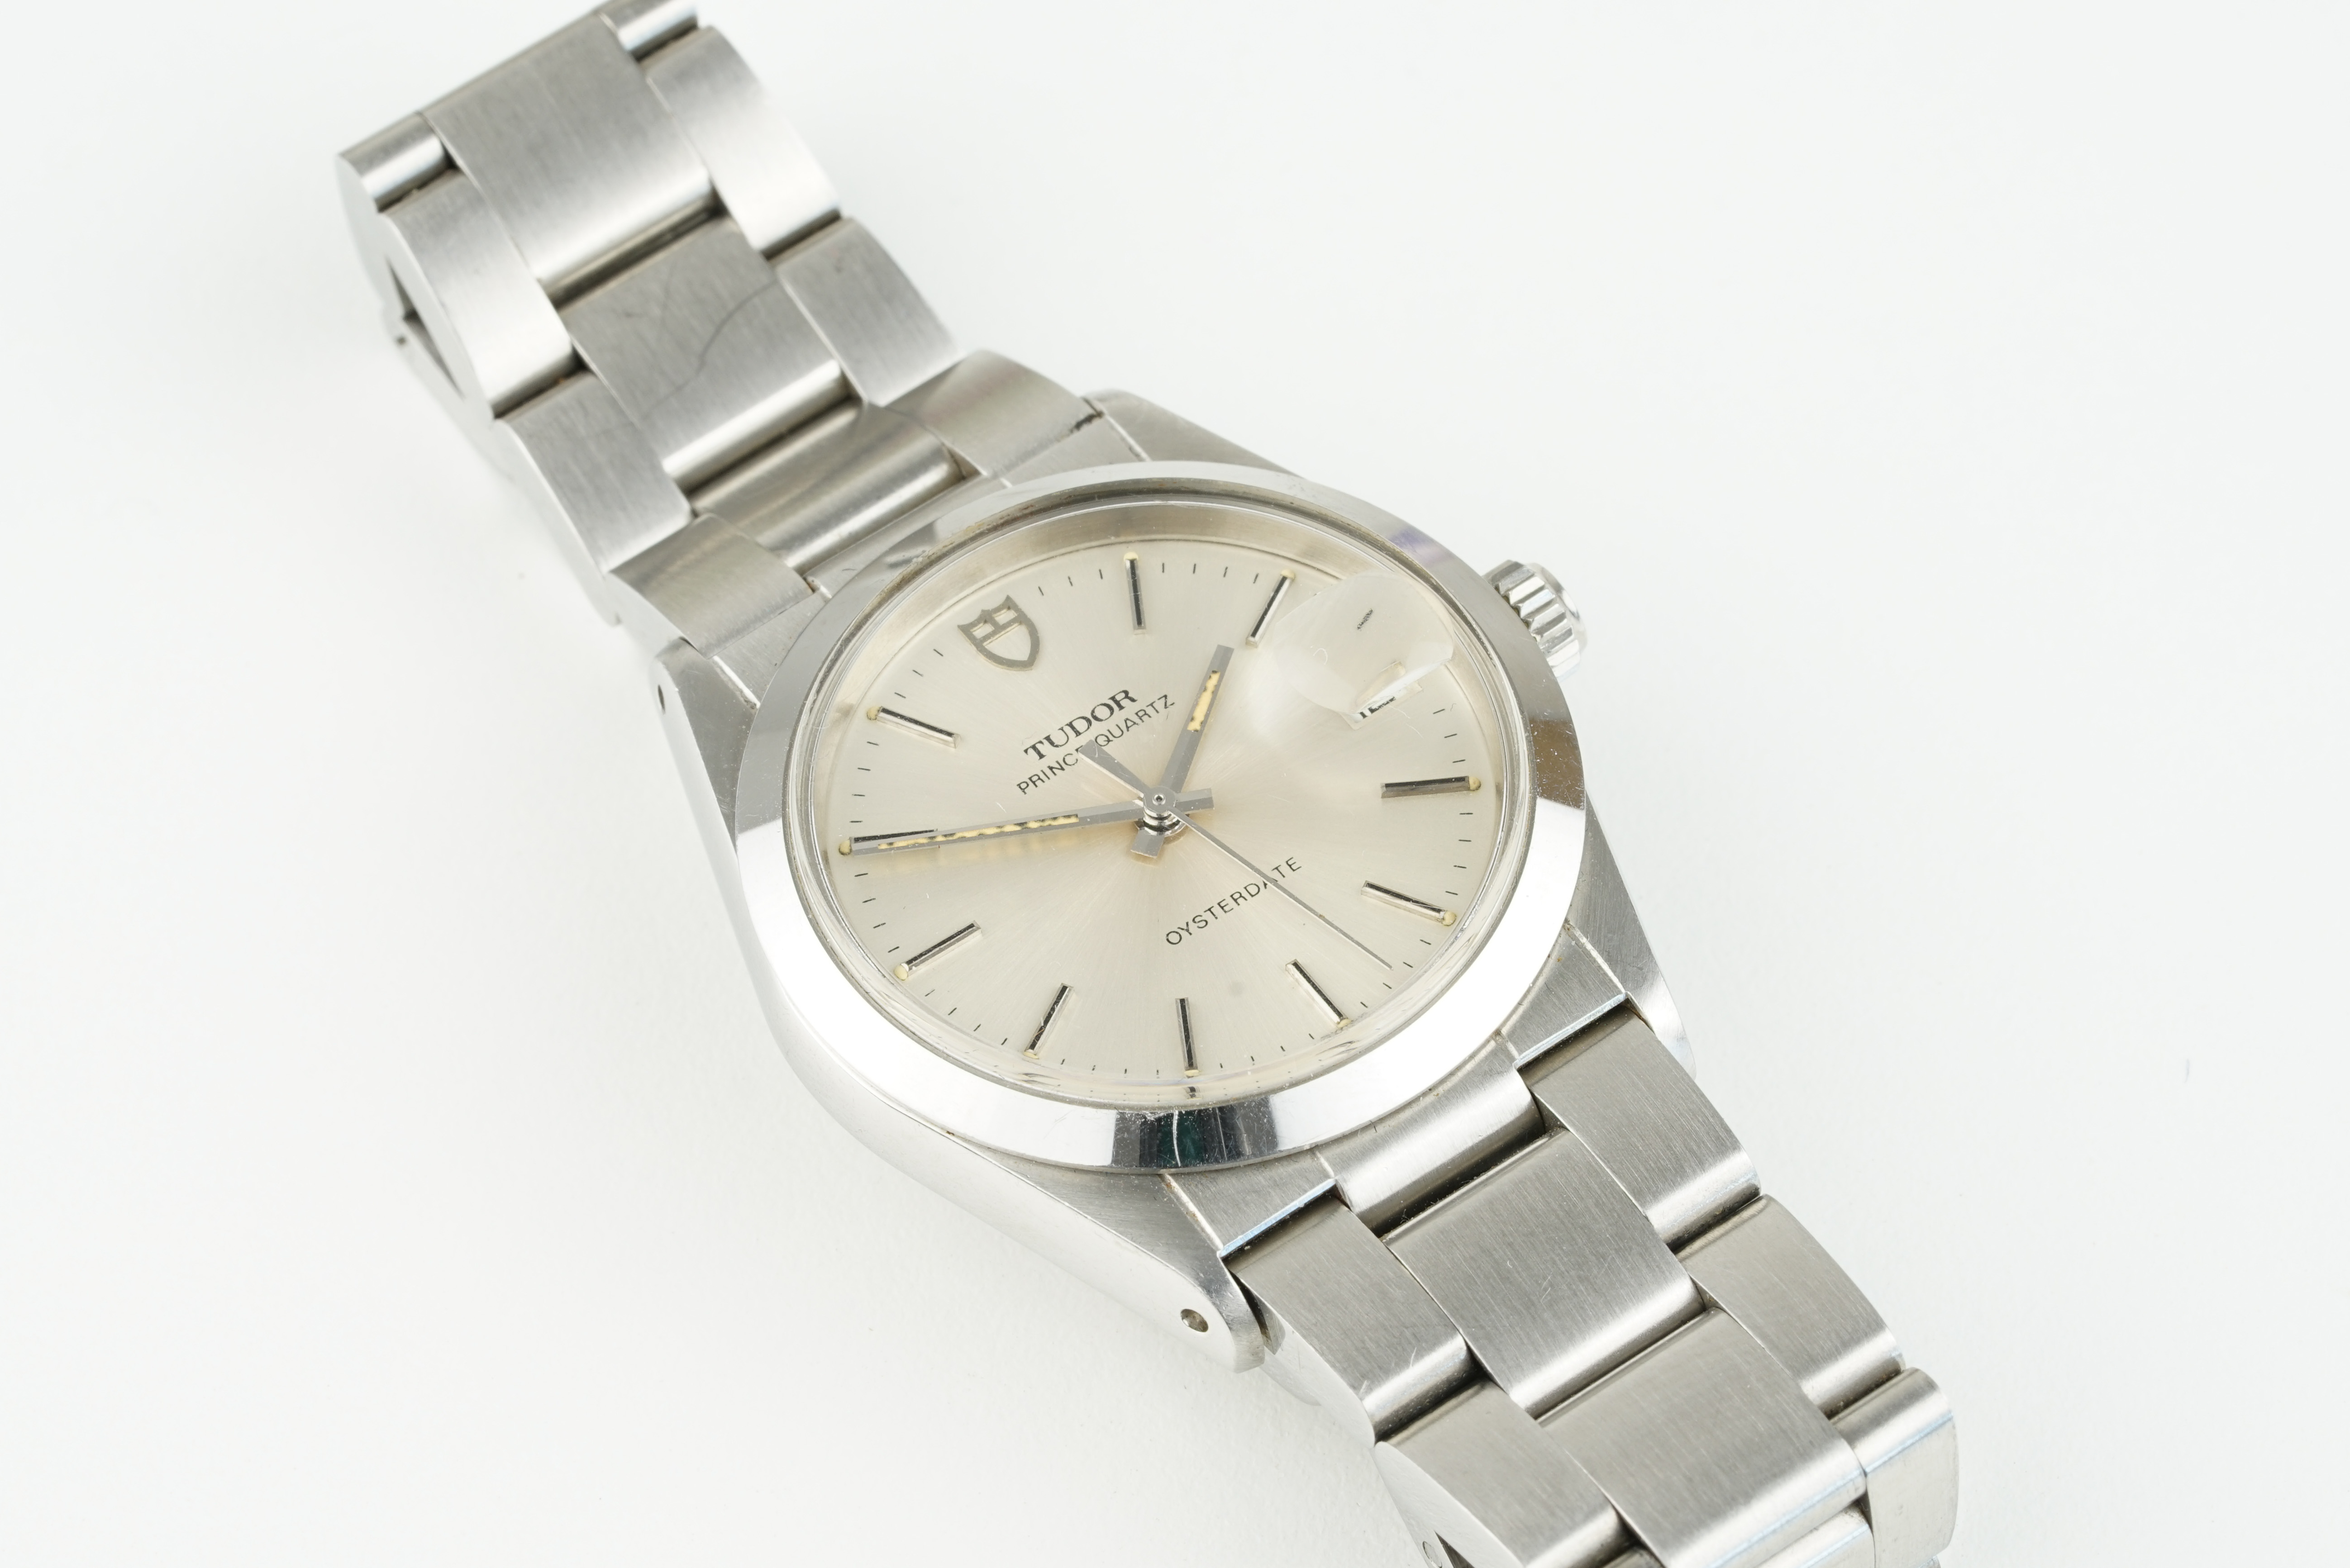 TUDOR PRINCE-QUARTZ OYSTERDATE WRISTWATCH REF. 78370, circular dial with hour markers and hands,